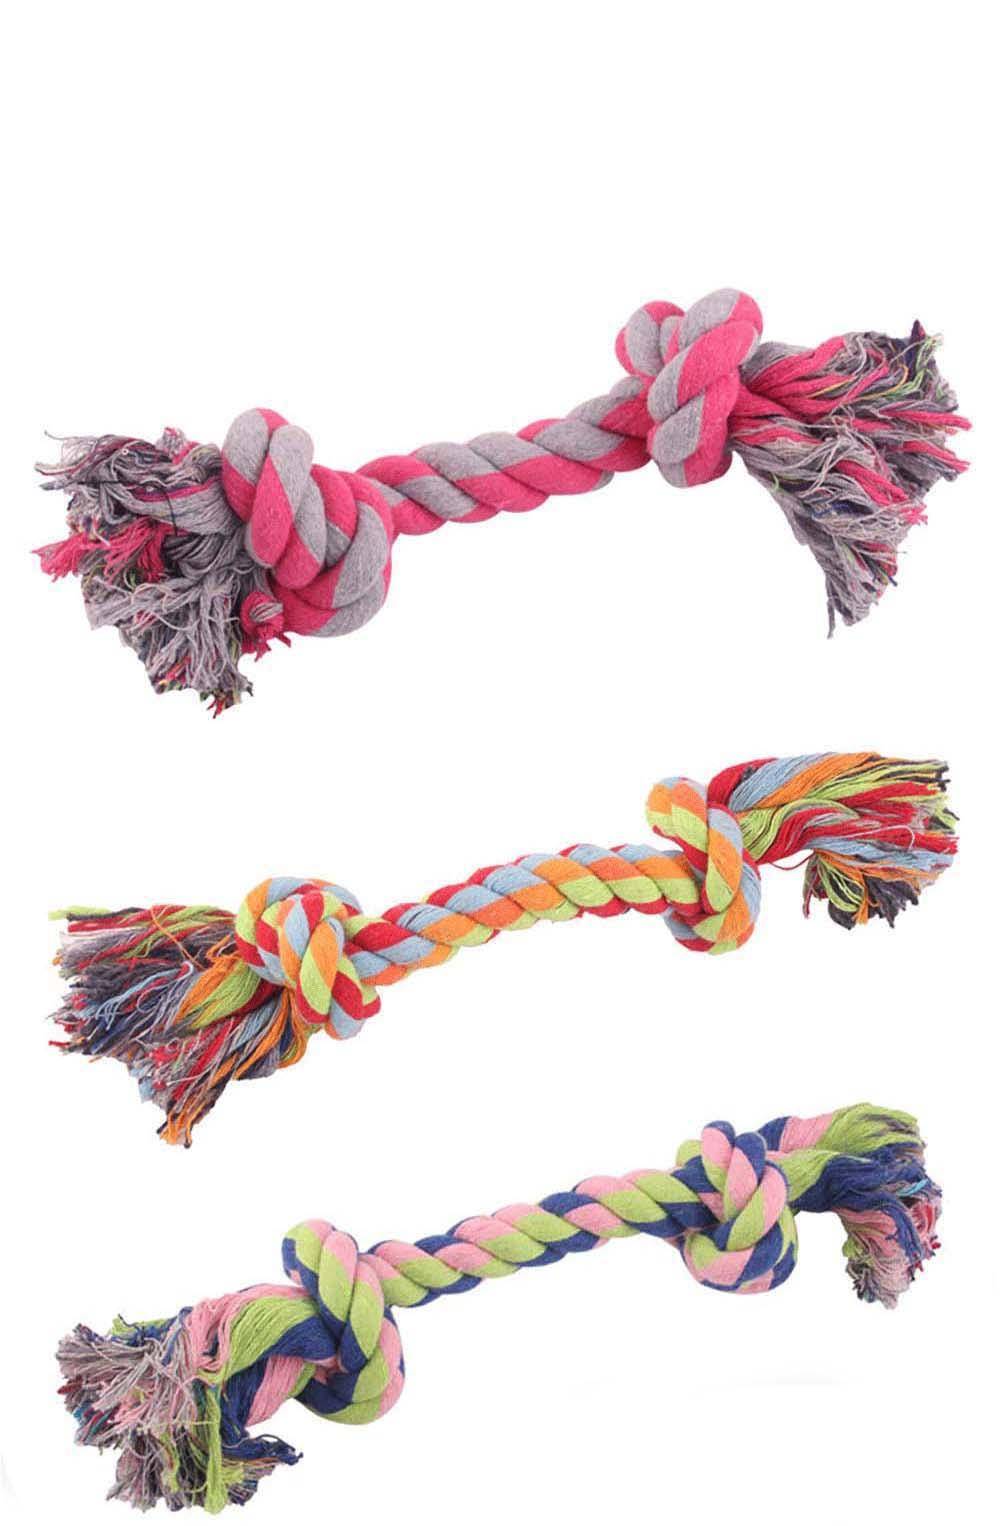 Colorful Cotton Dog Rope Toy